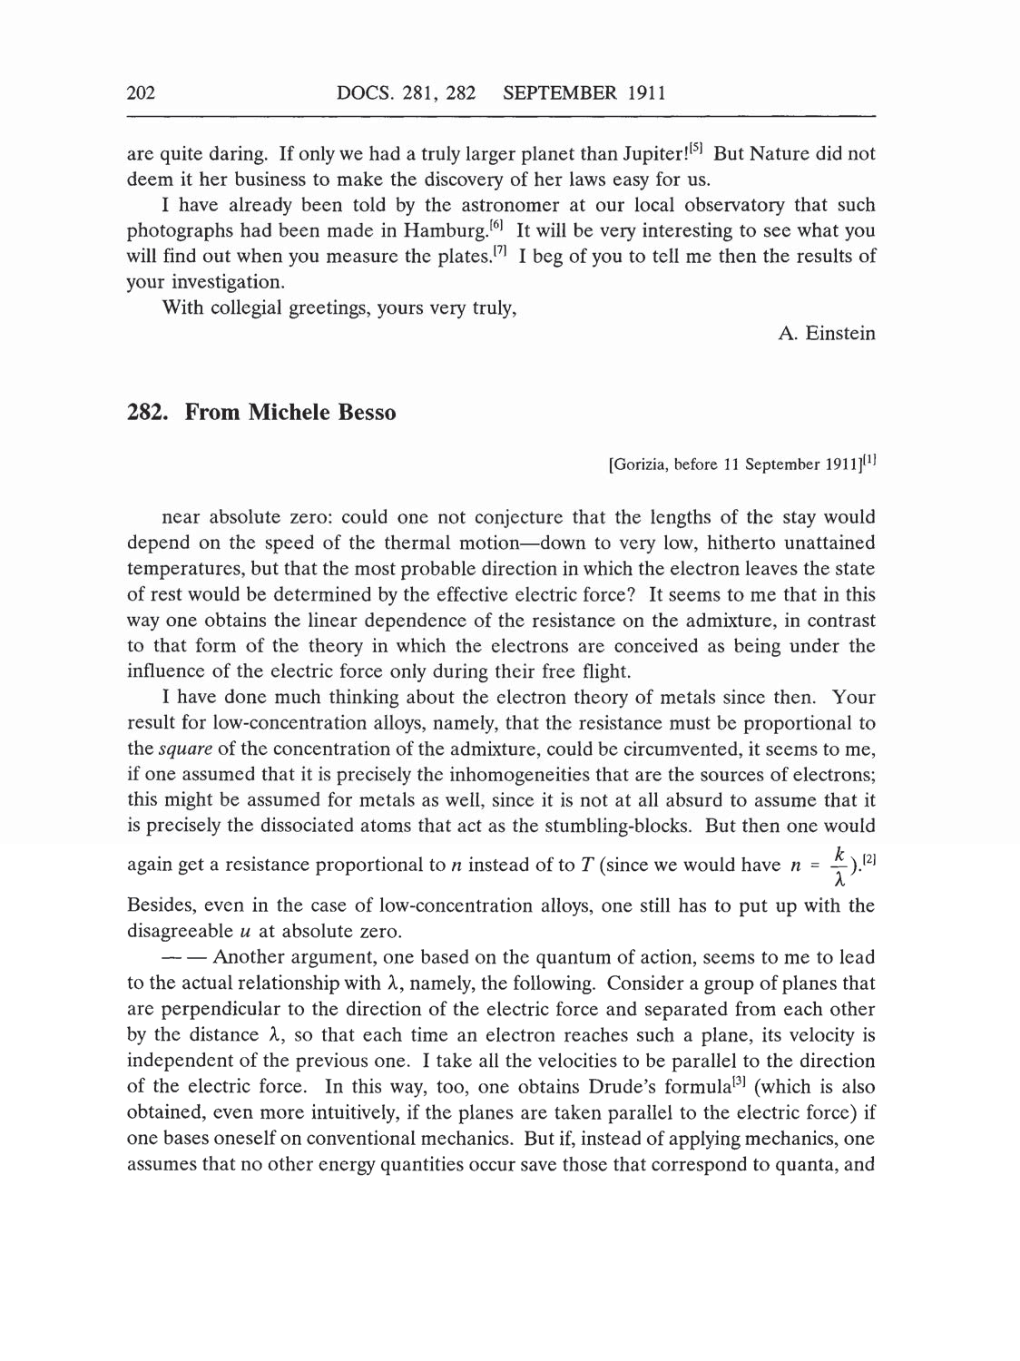 Volume 5: The Swiss Years: Correspondence, 1902-1914 (English translation supplement) page 202